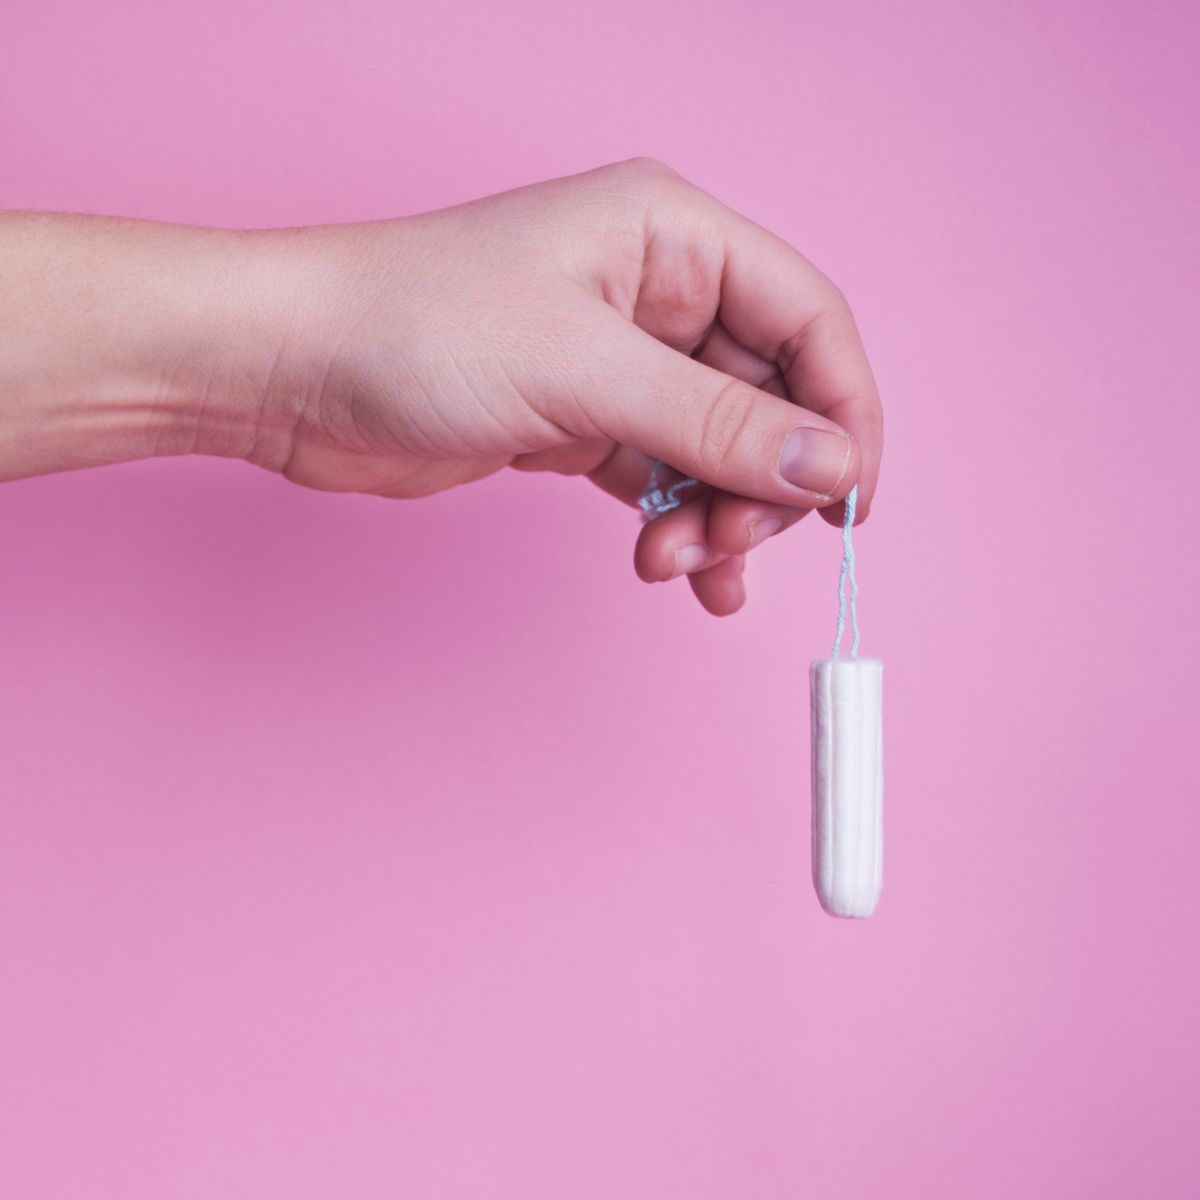 How Long Can you Leave A Tampon In + Safe